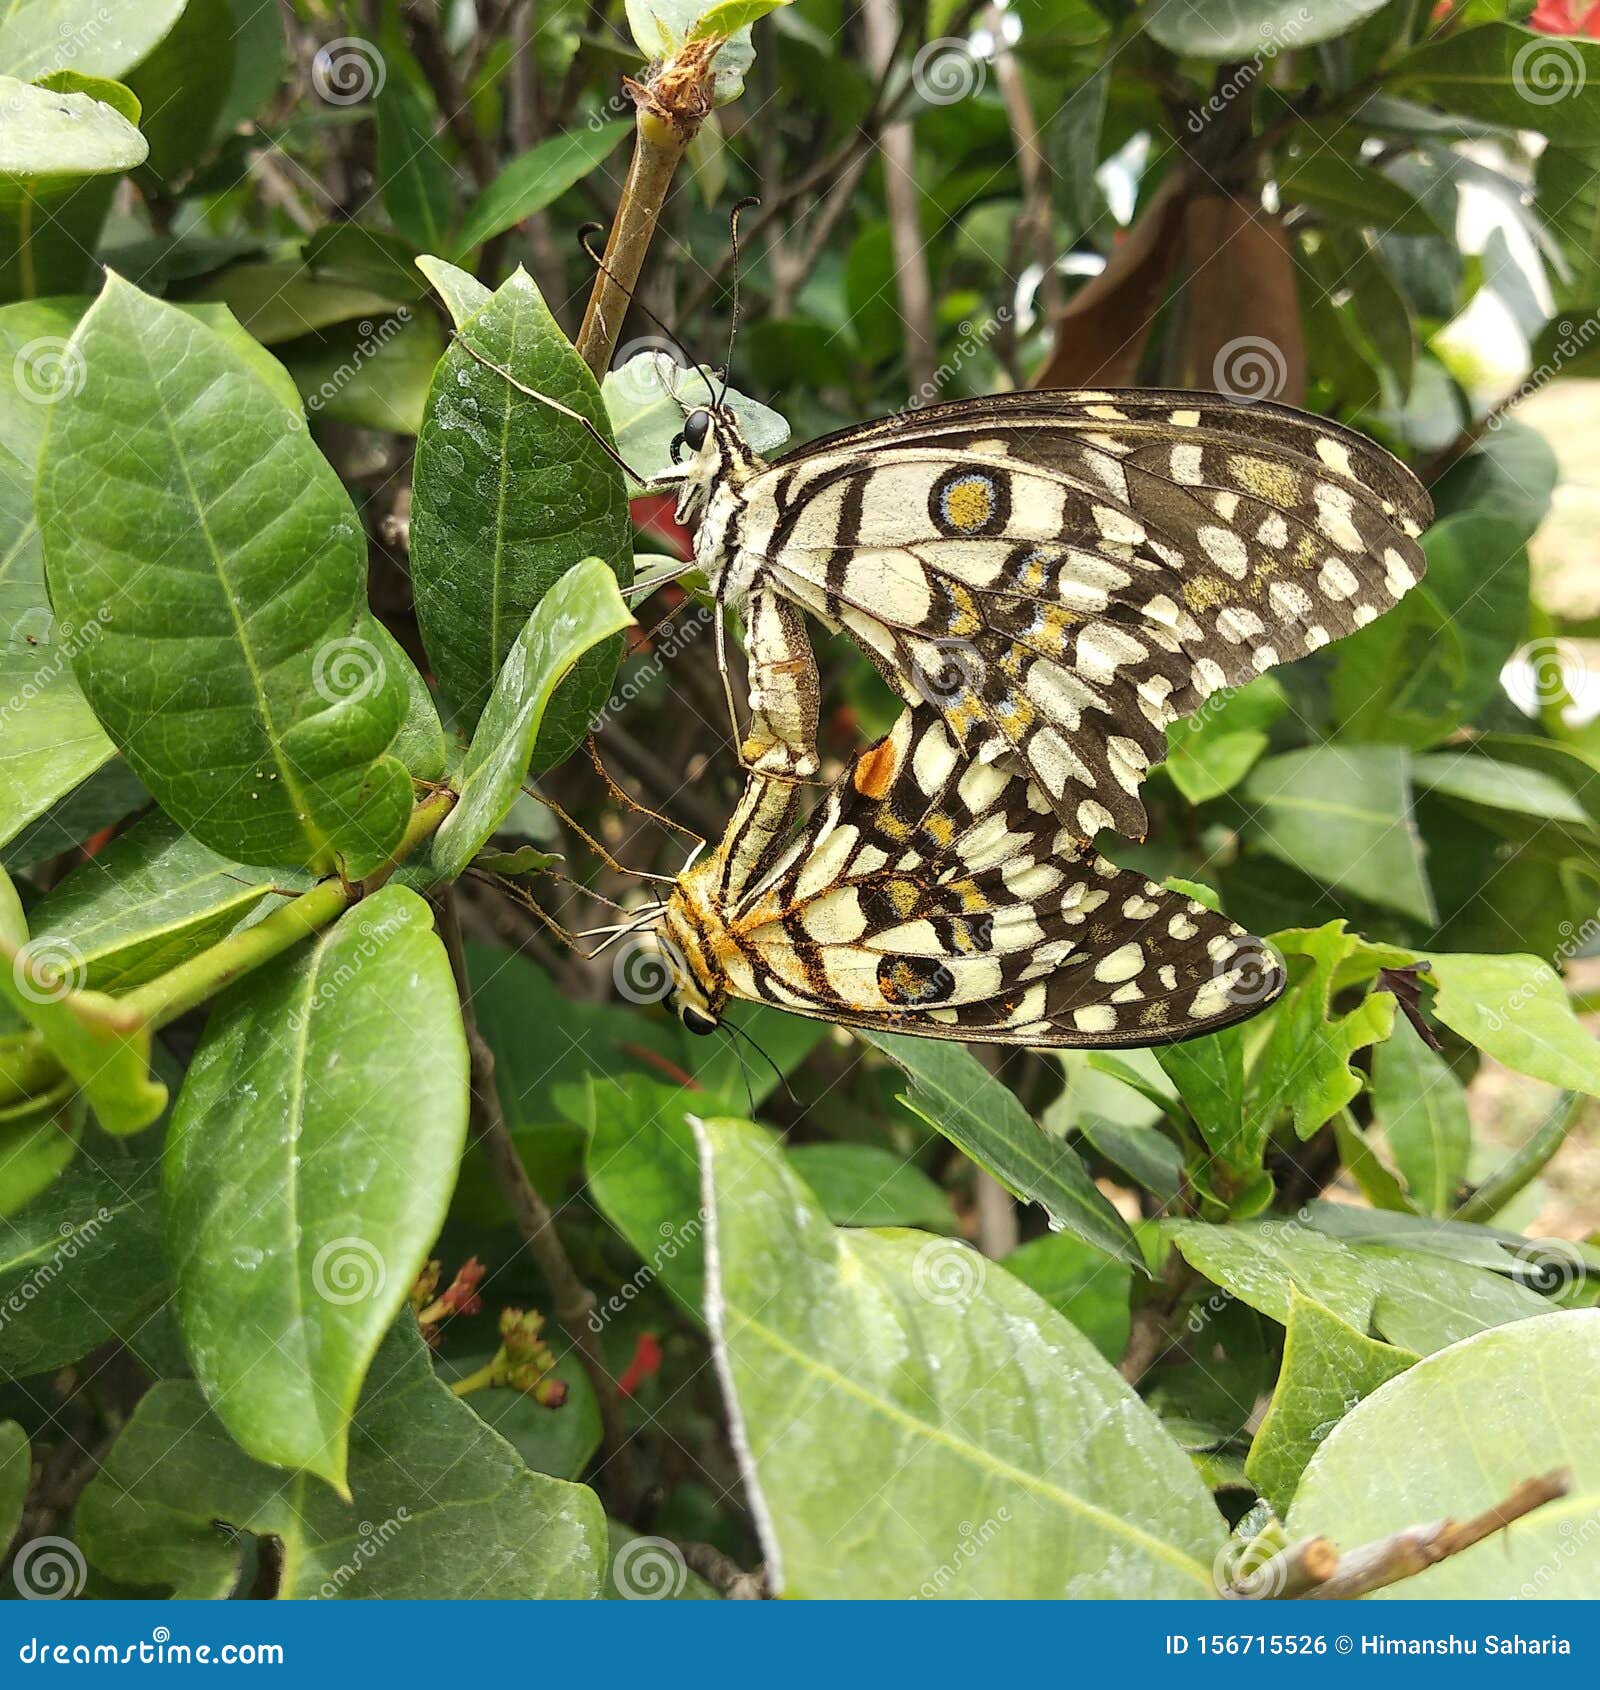 butterfly mating in garden plant